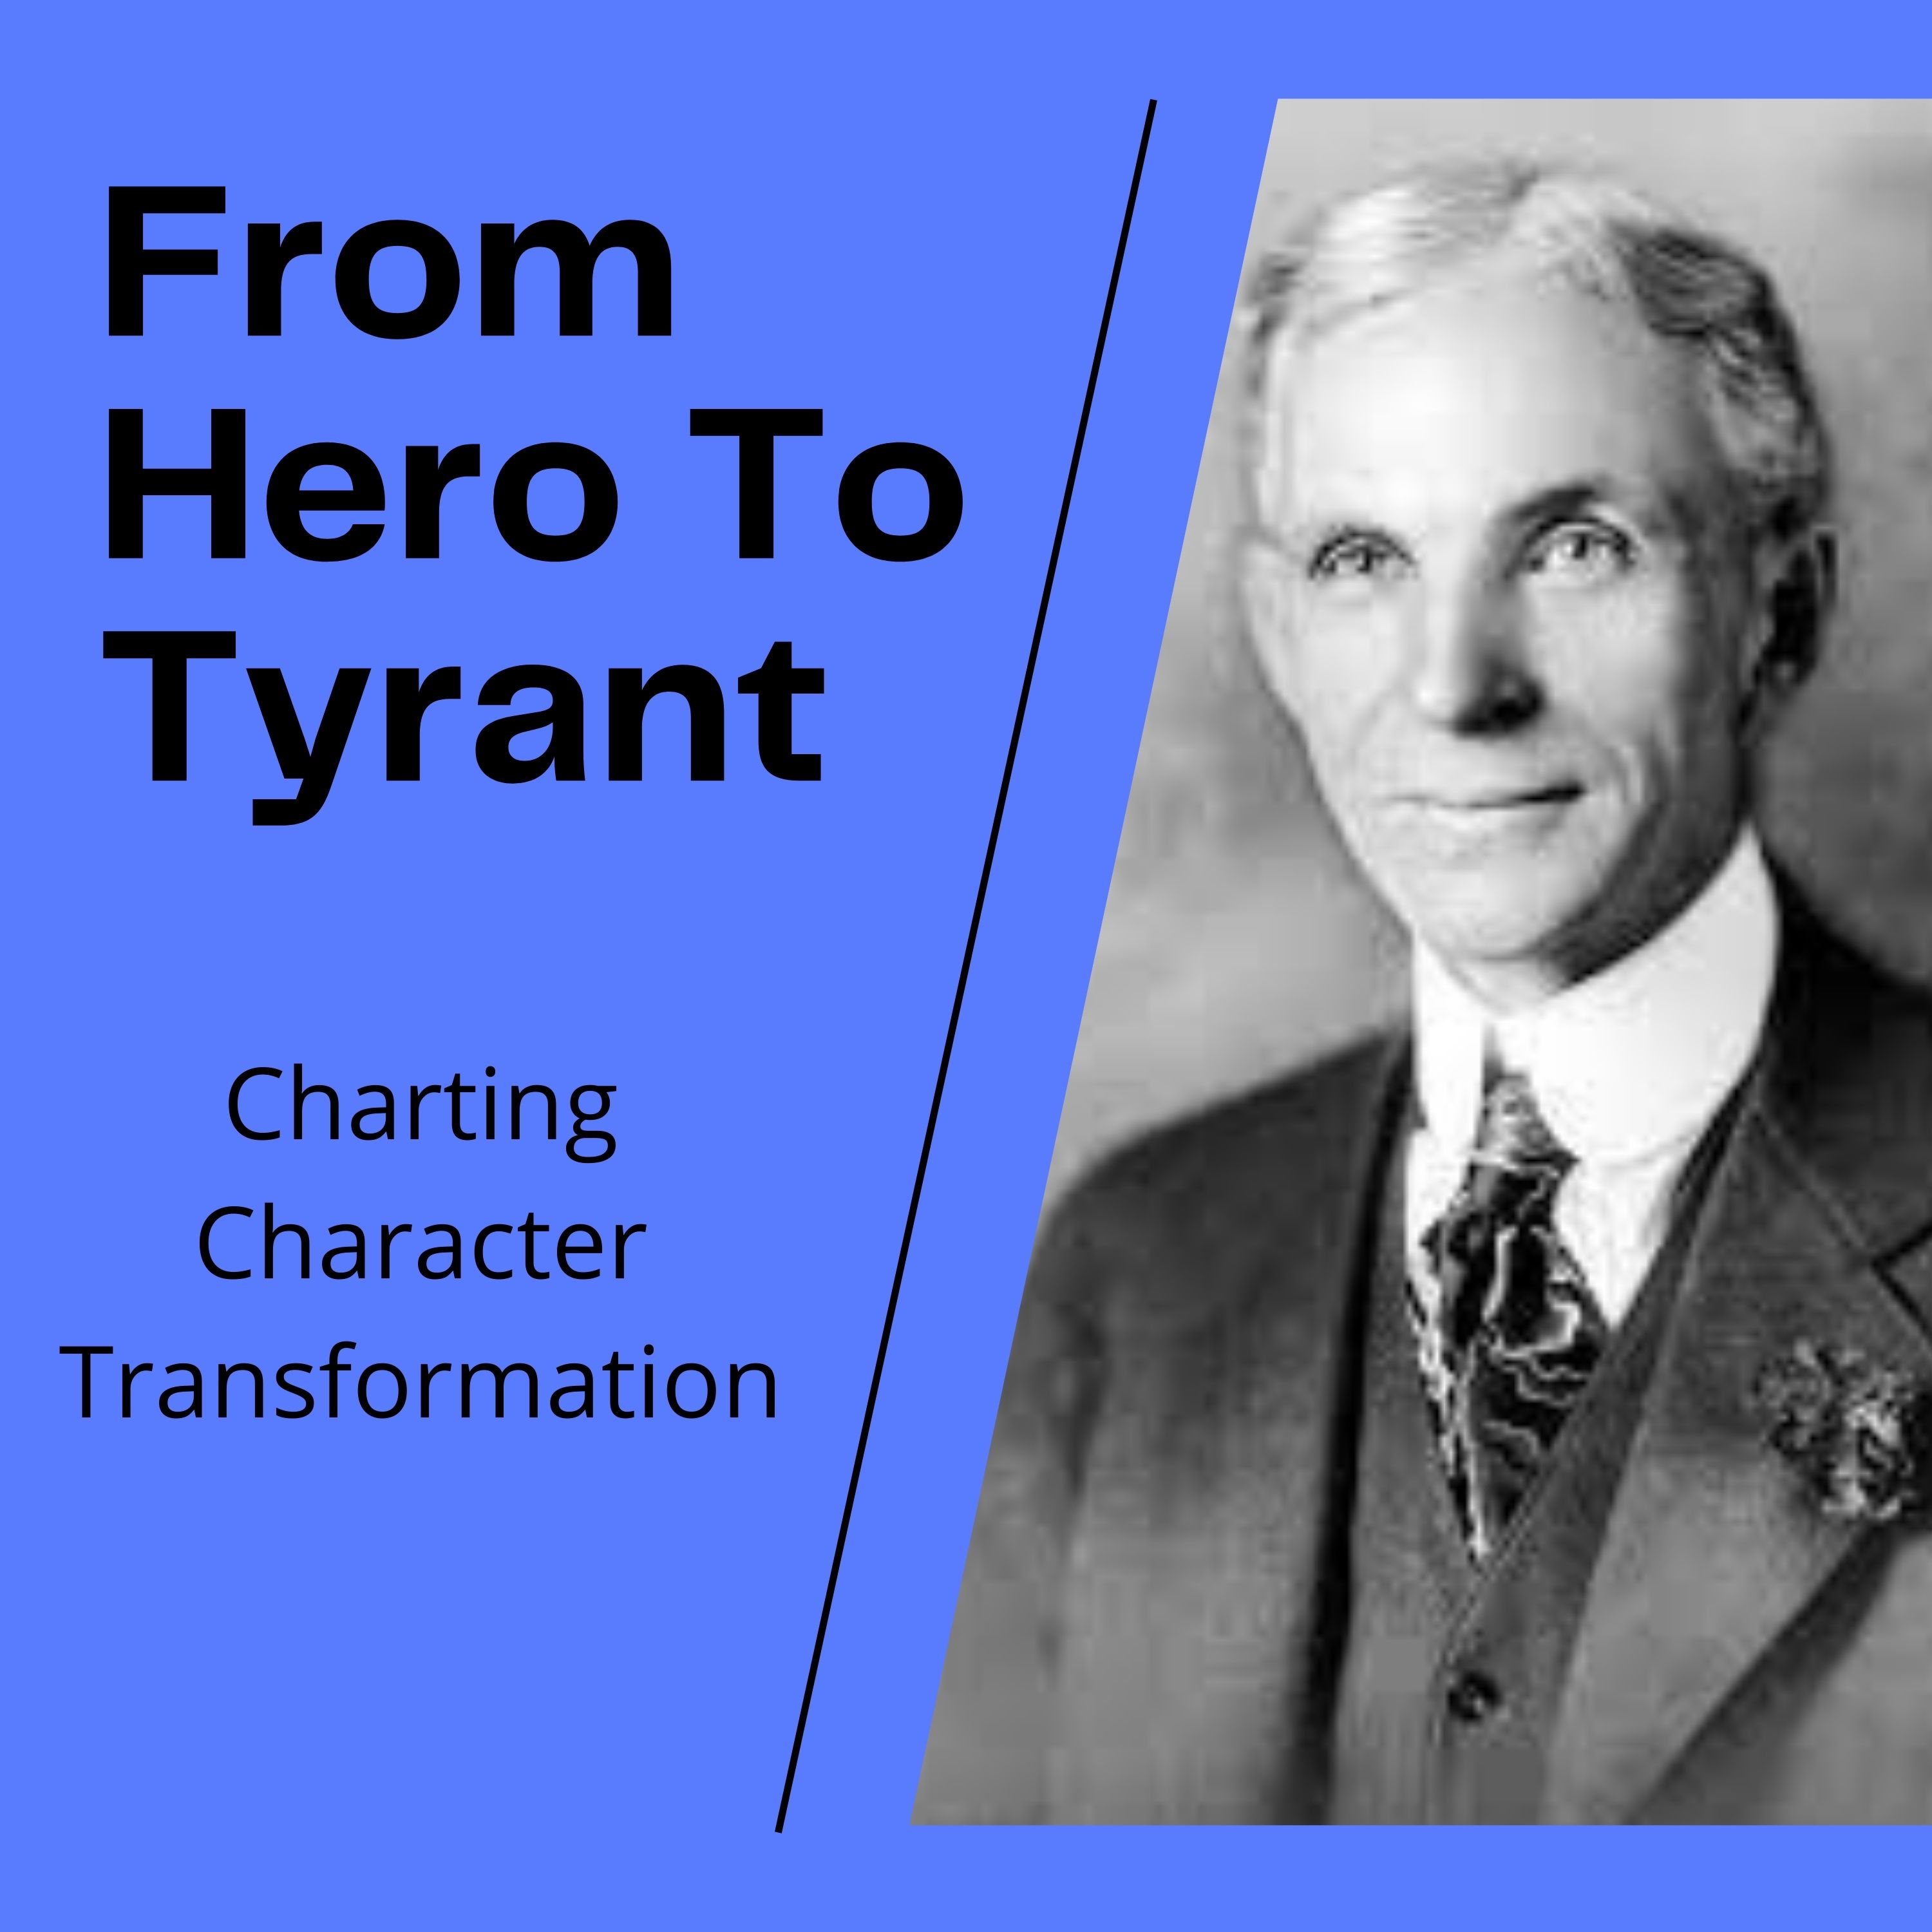 From Hero To Tyrant: Editing Character Transformation